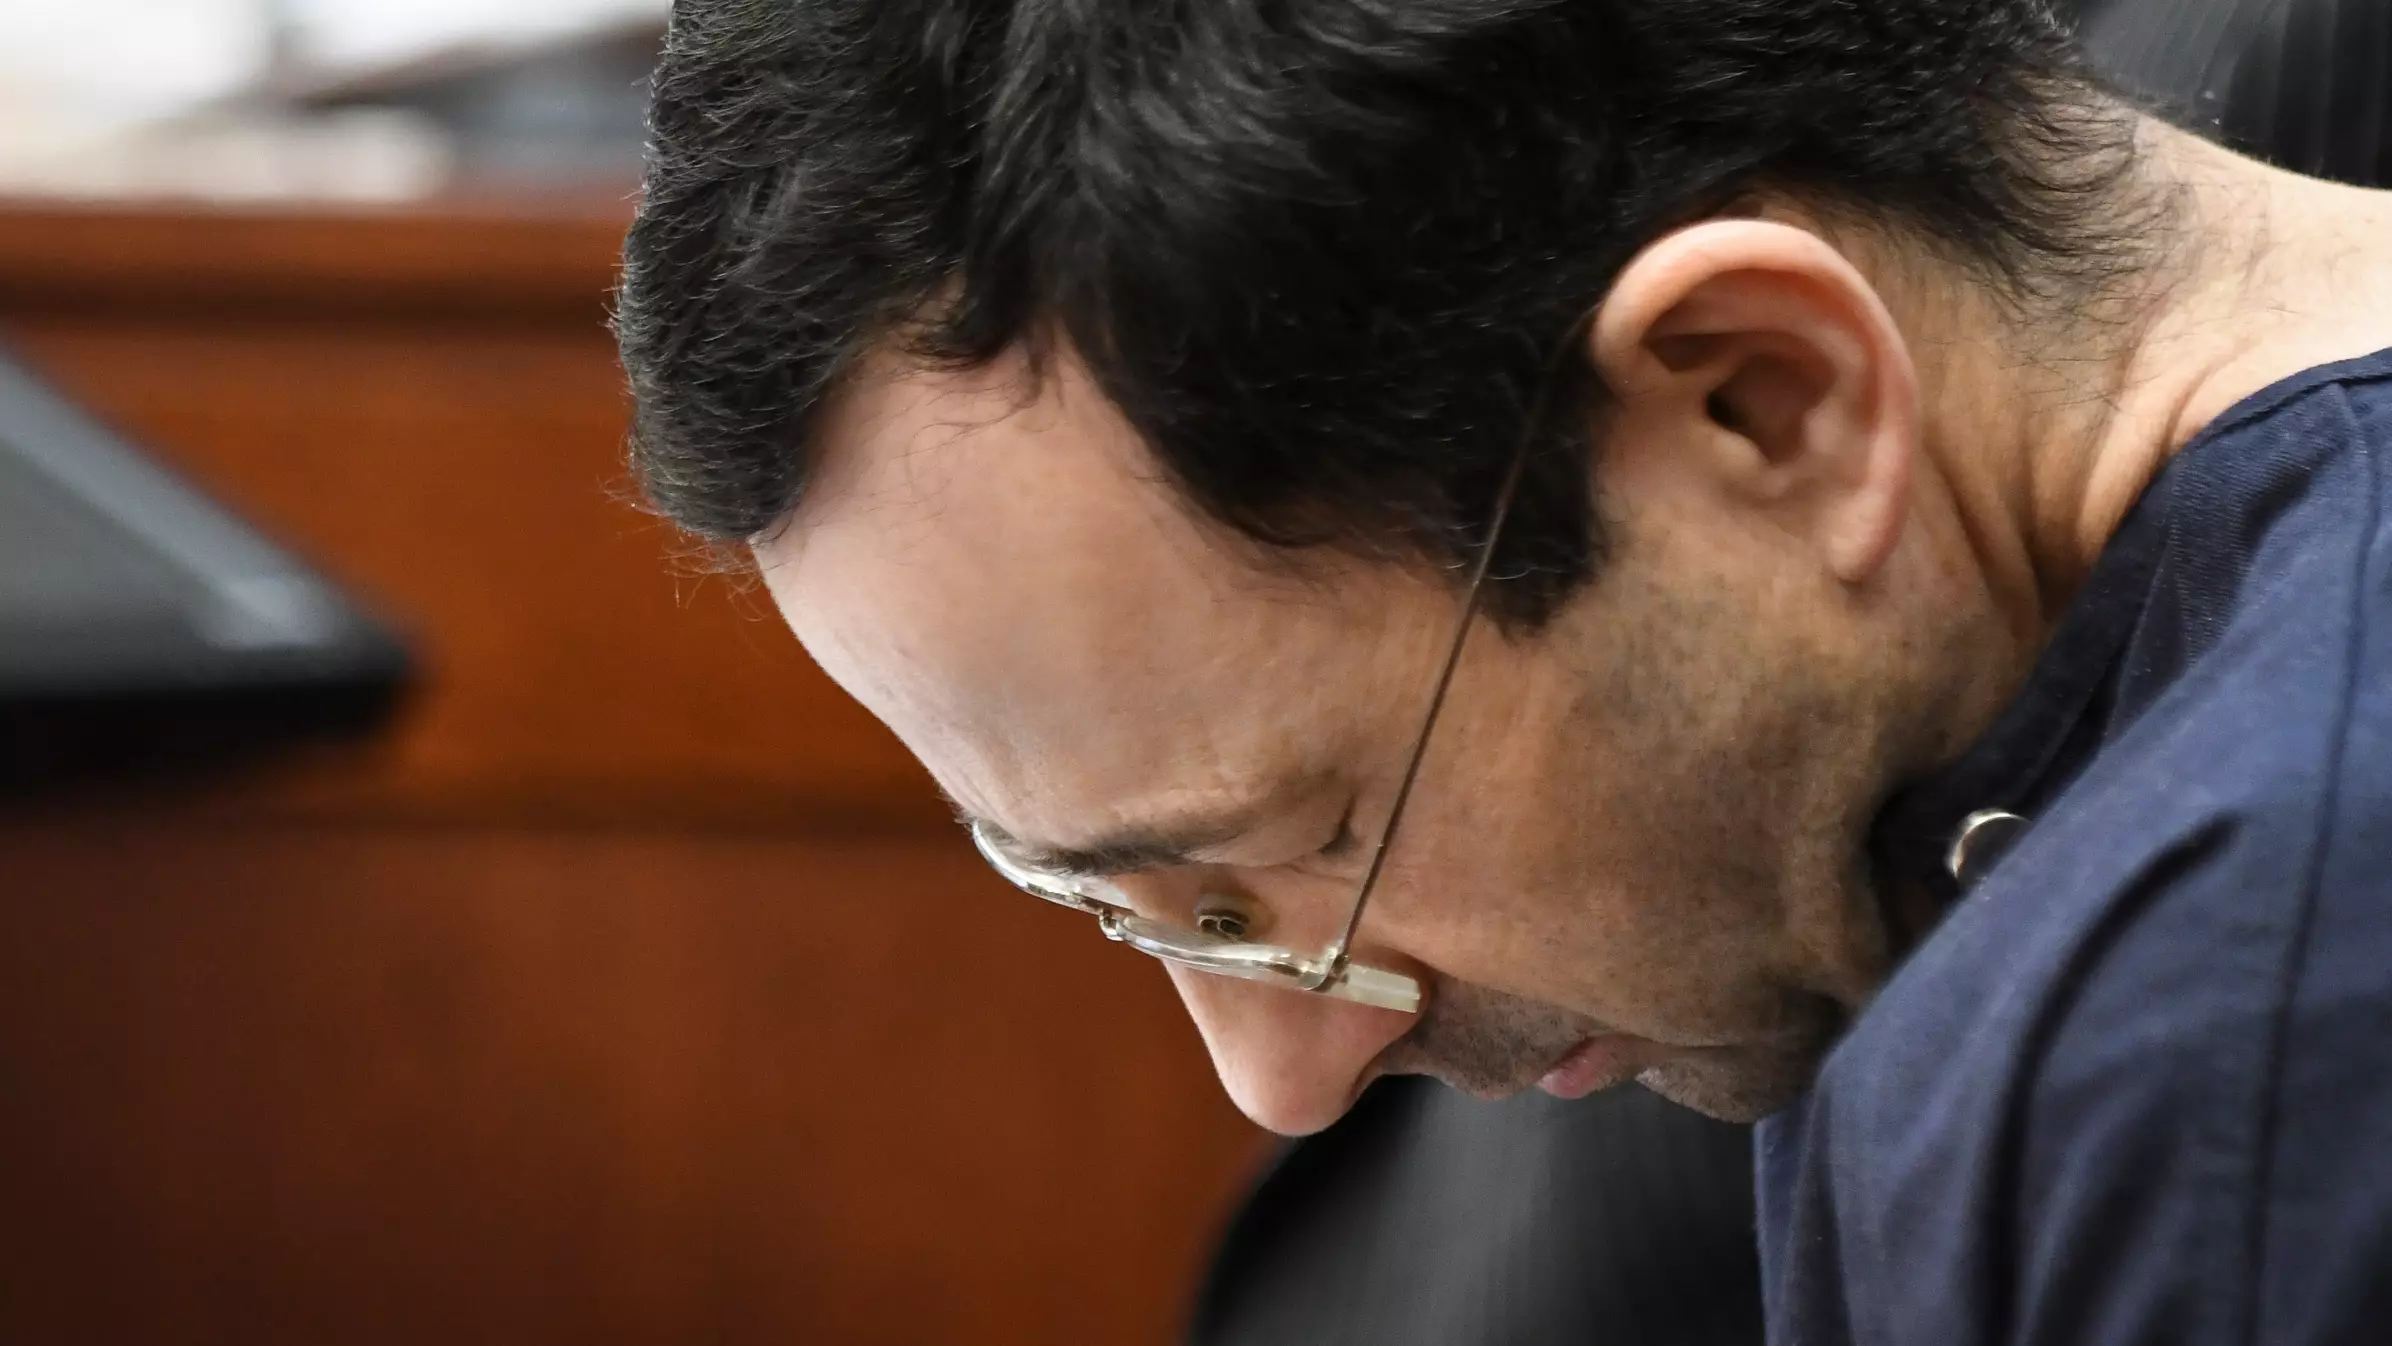 Courtroom Erupts Into Laughter As Larry Nassar Claims He Was 'Manipulated'